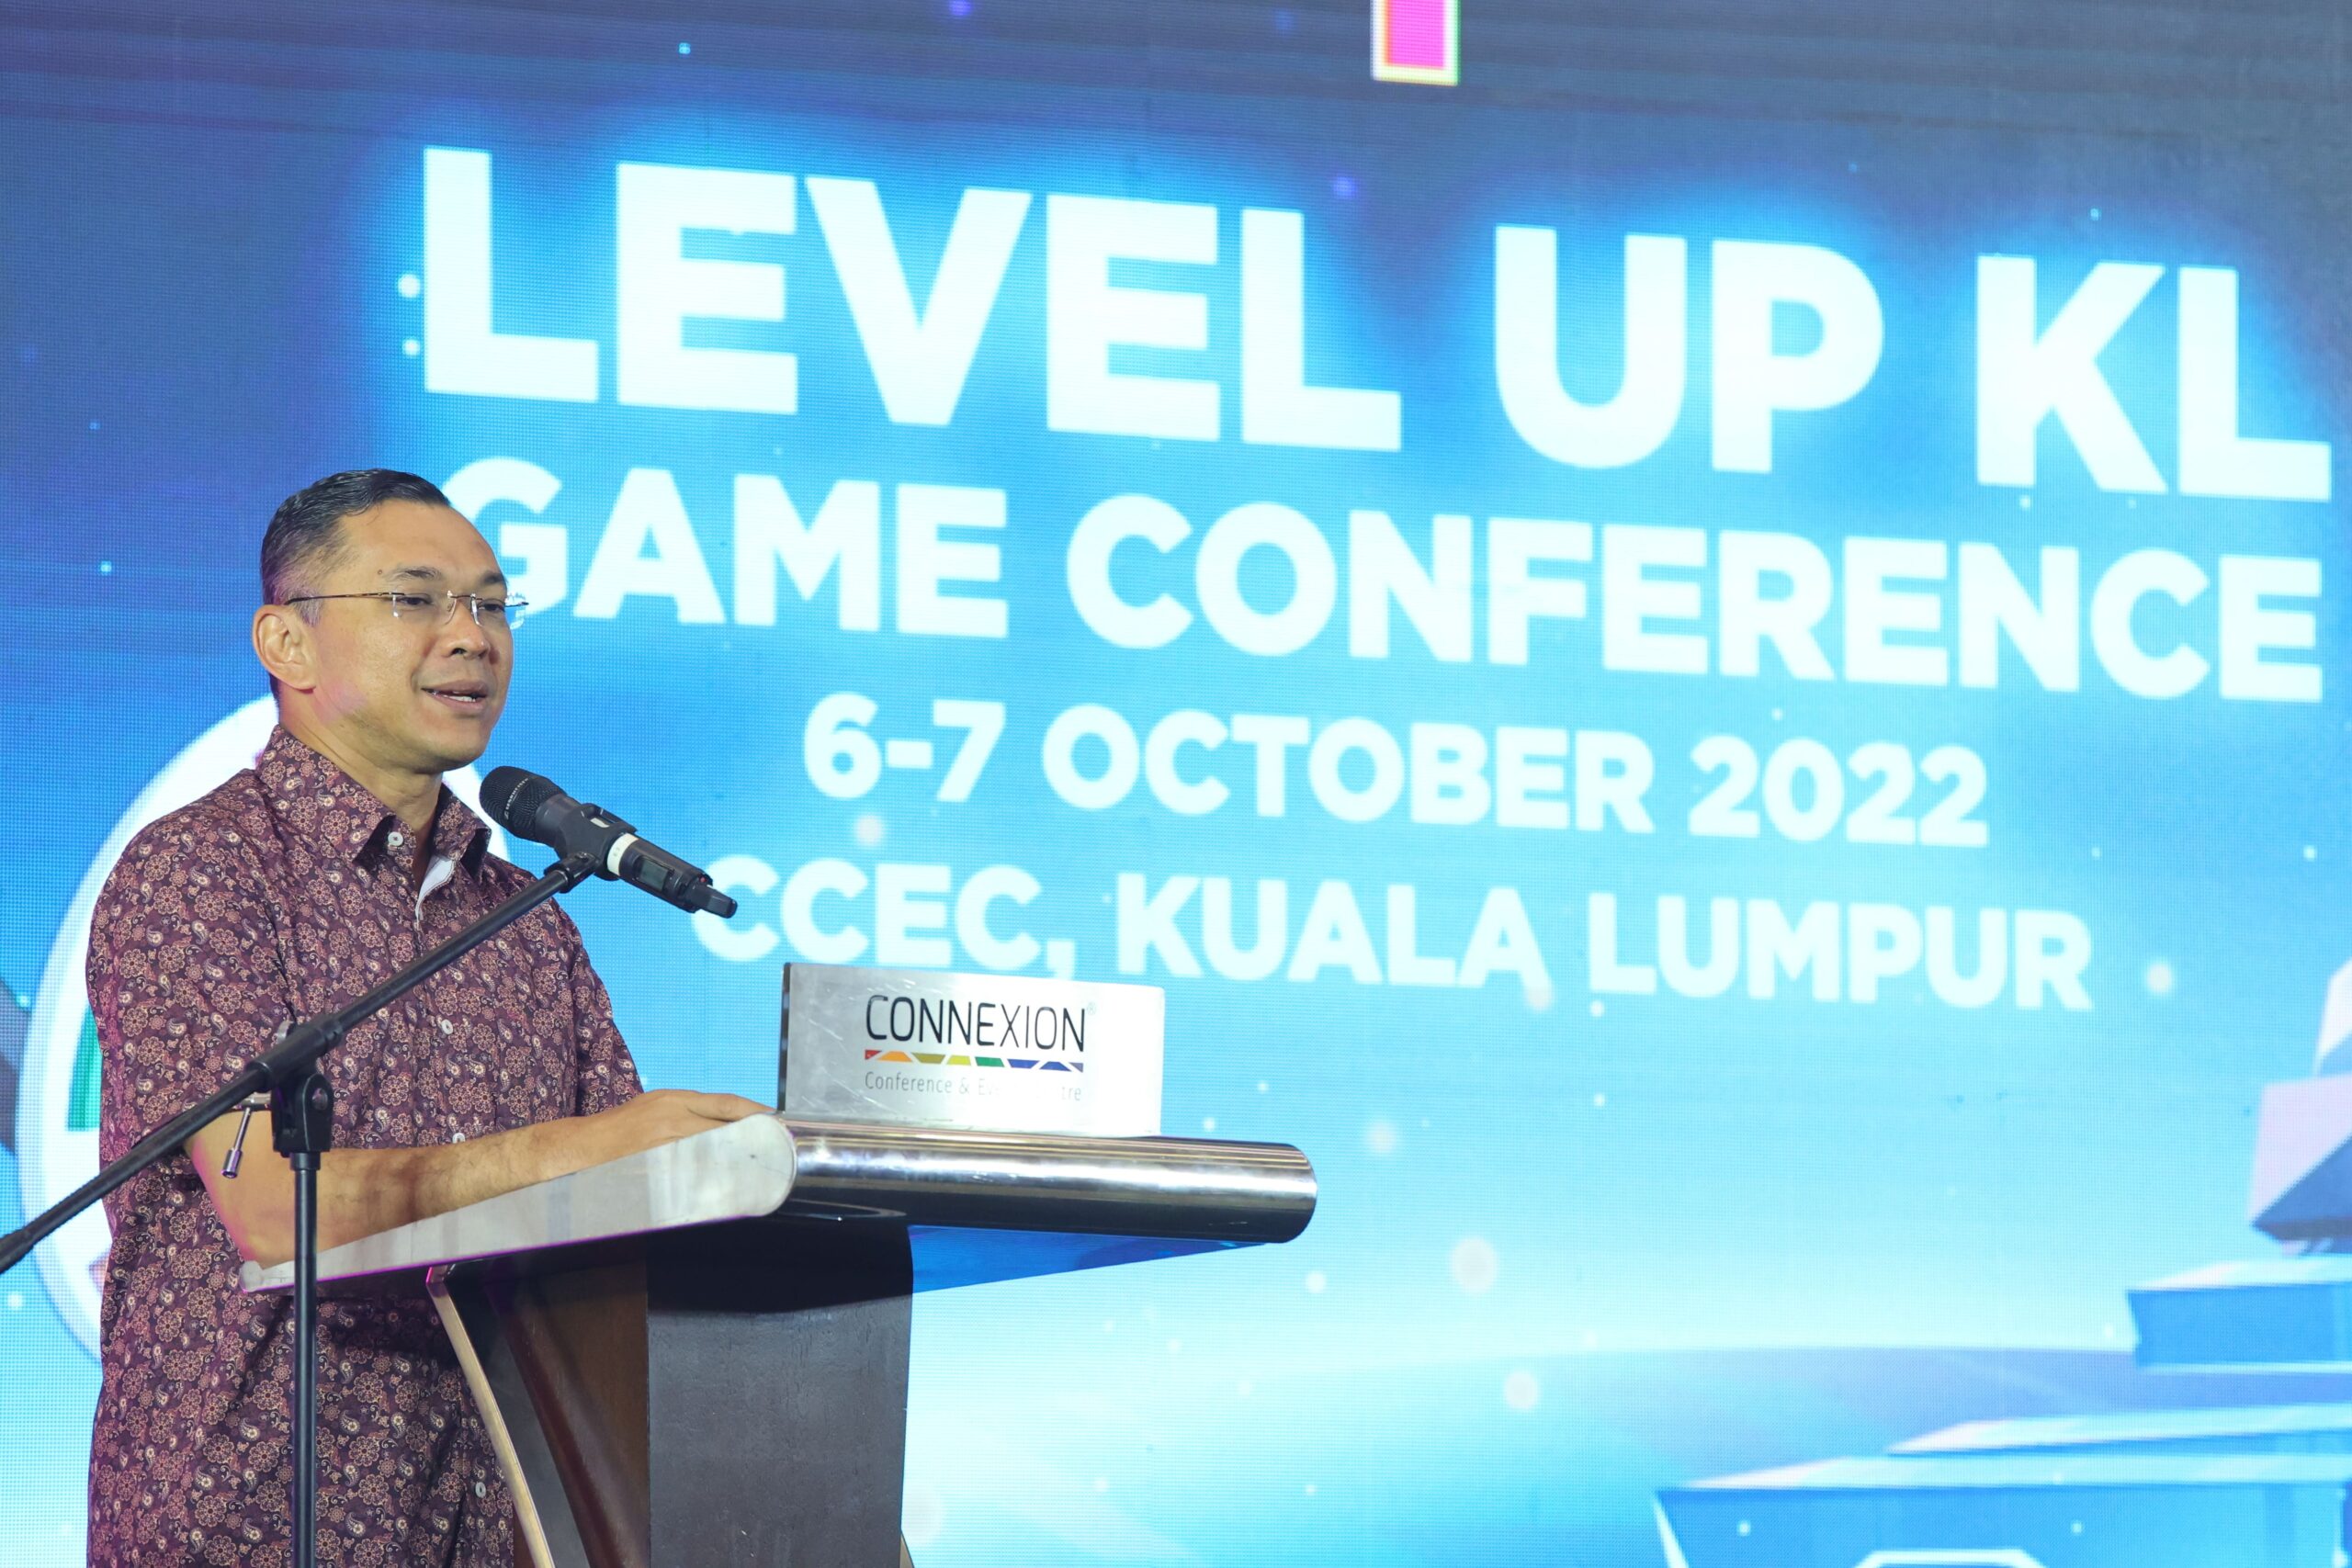  Ts Mahadhir Aziz, CEO, MDEC, delivering his welcoming speech at LEVEL UP KL 2022 